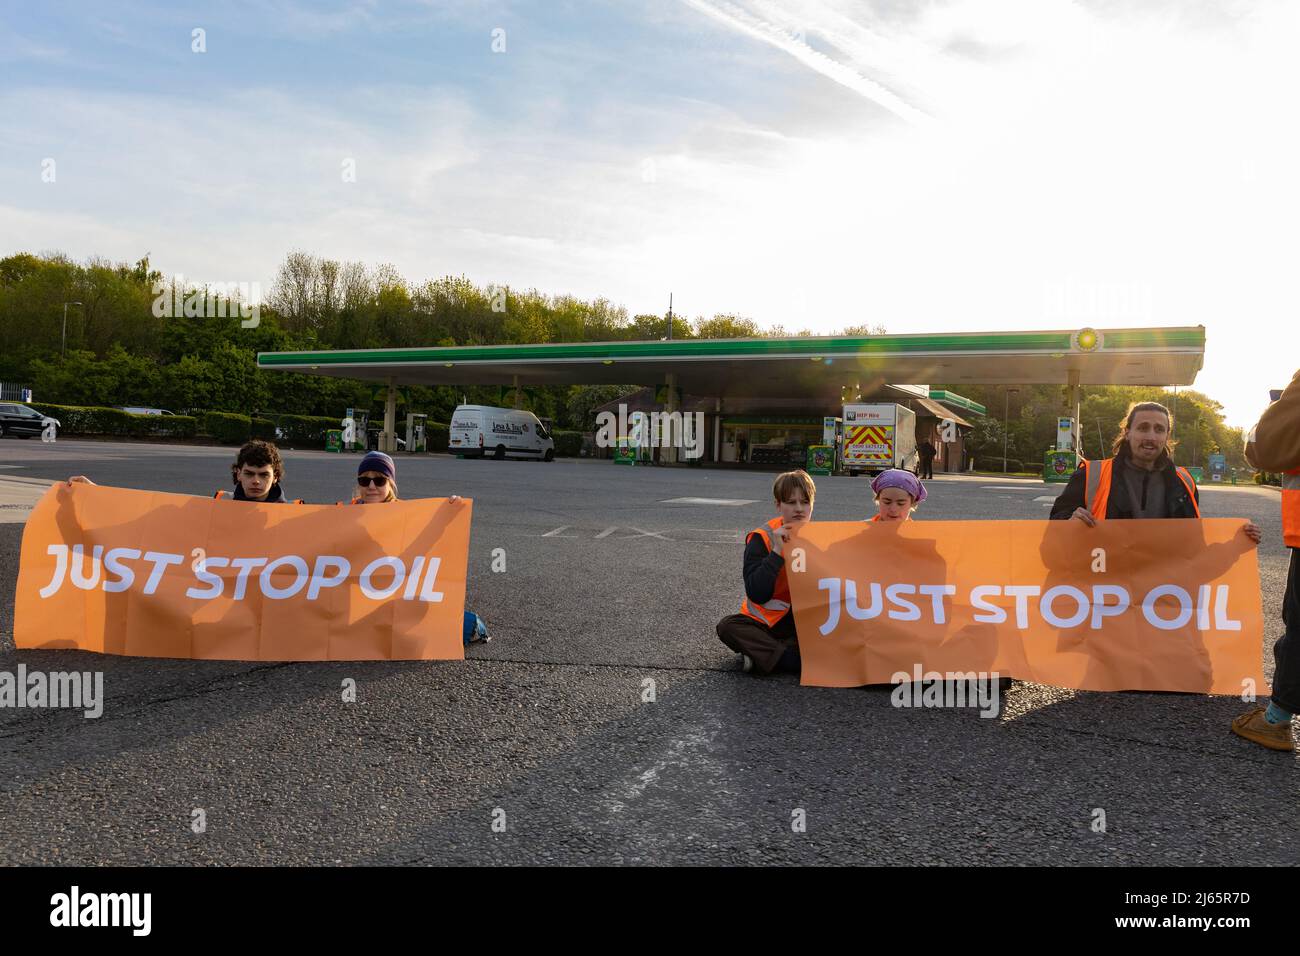 Kent, UK.  28 April 2022 Protesters from Just Stop Oil blockade the BP garage at Clacket Lane Services on the M25. They call on the government to end new fossil fuel extraction and gas and oil drilling, urging them to invest in renewable energy instead. Protesters smash the glass on petrol pumps and graffiti over the front, finally gluing themselves to the pumps Credit: Denise Laura Baker/Alamy Live News Credit: Denise Laura Baker/Alamy Live News Stock Photo